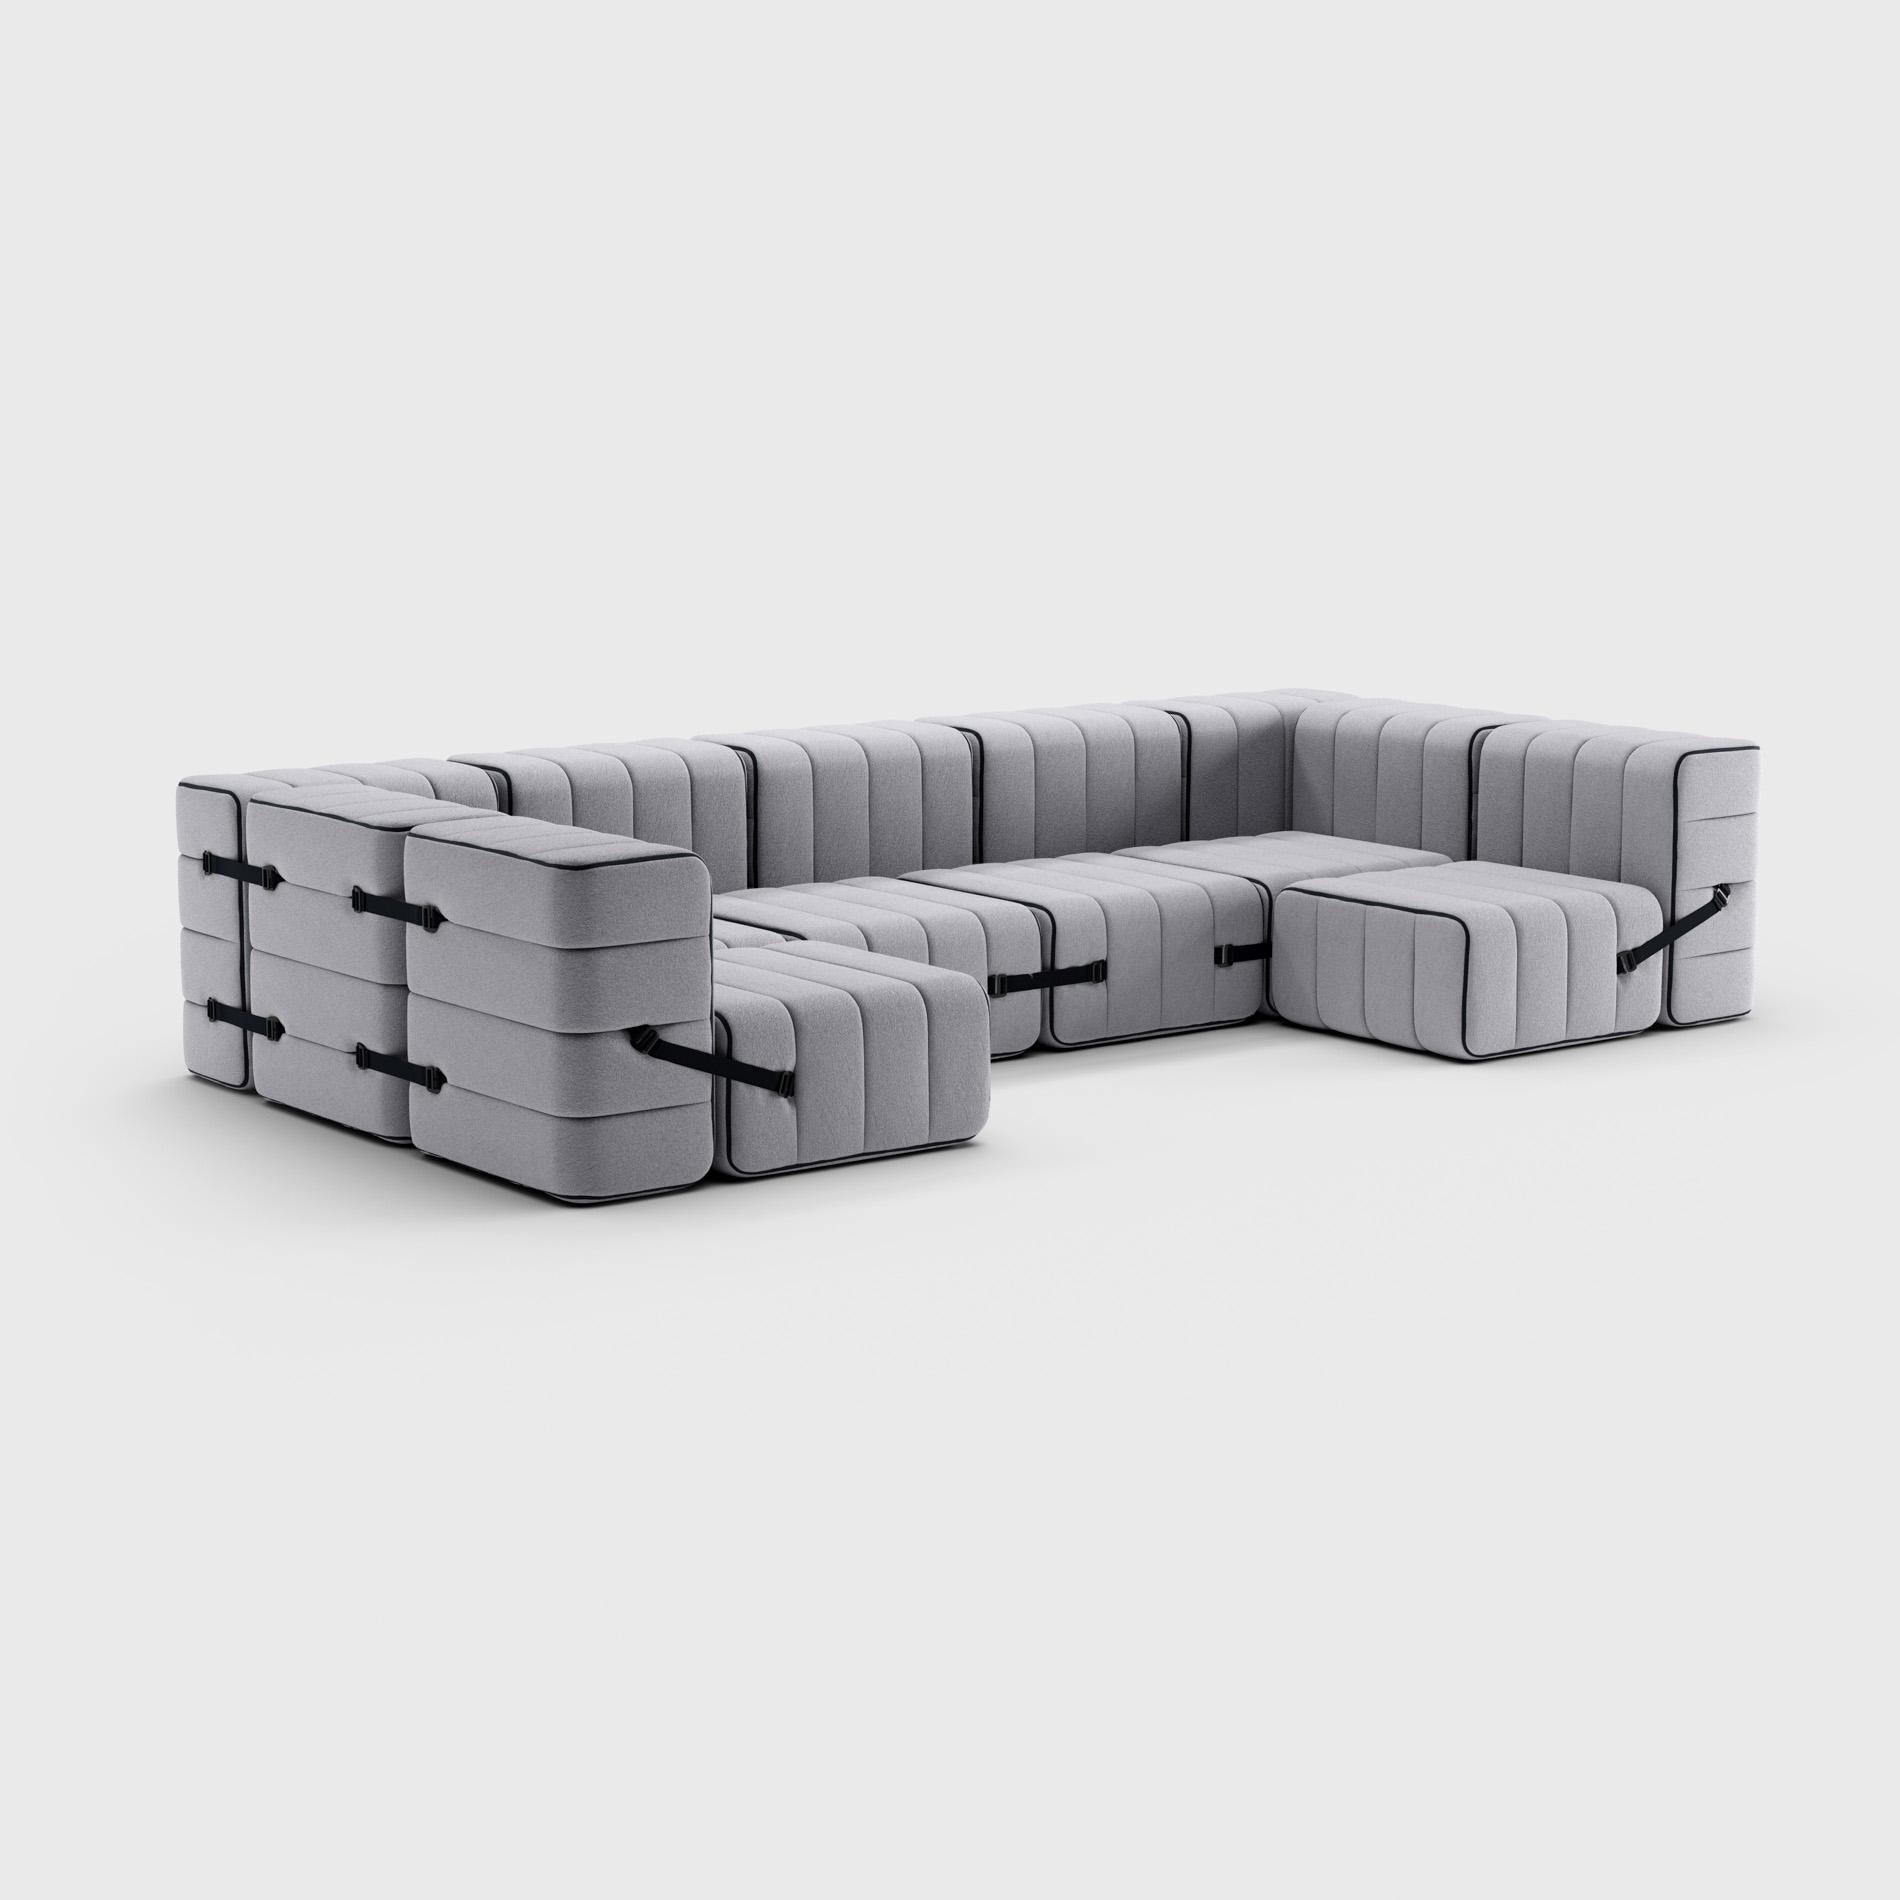  Curt Single Module – Fabric Jet '9803 Grey' – Curt Modular Sofa System In New Condition For Sale In Berlin, BE